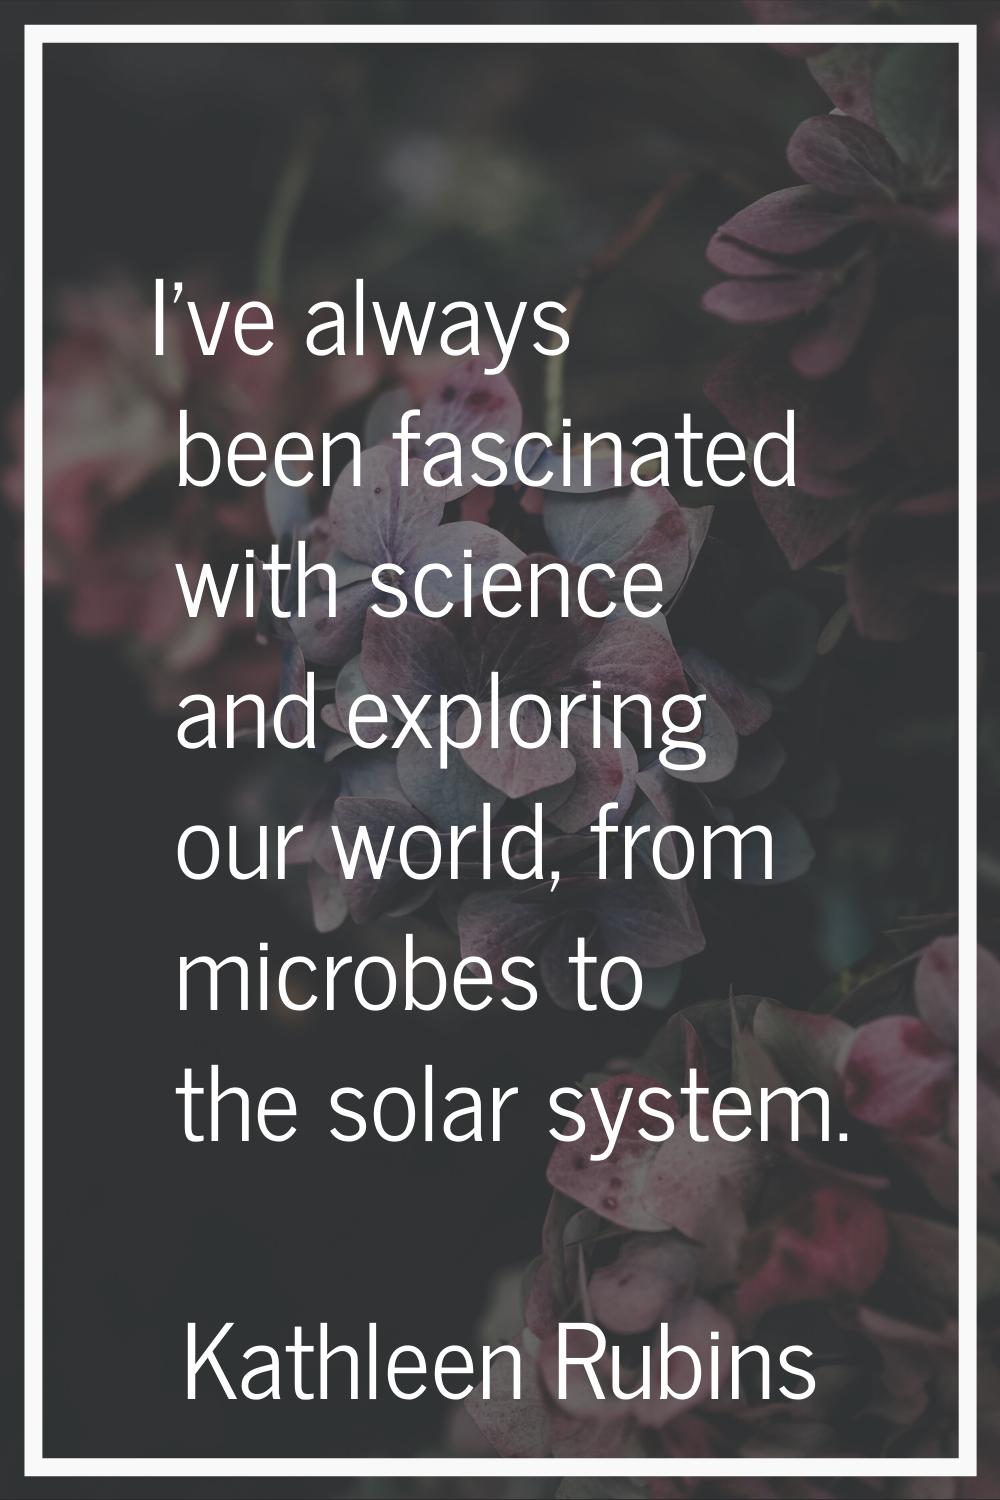 I've always been fascinated with science and exploring our world, from microbes to the solar system